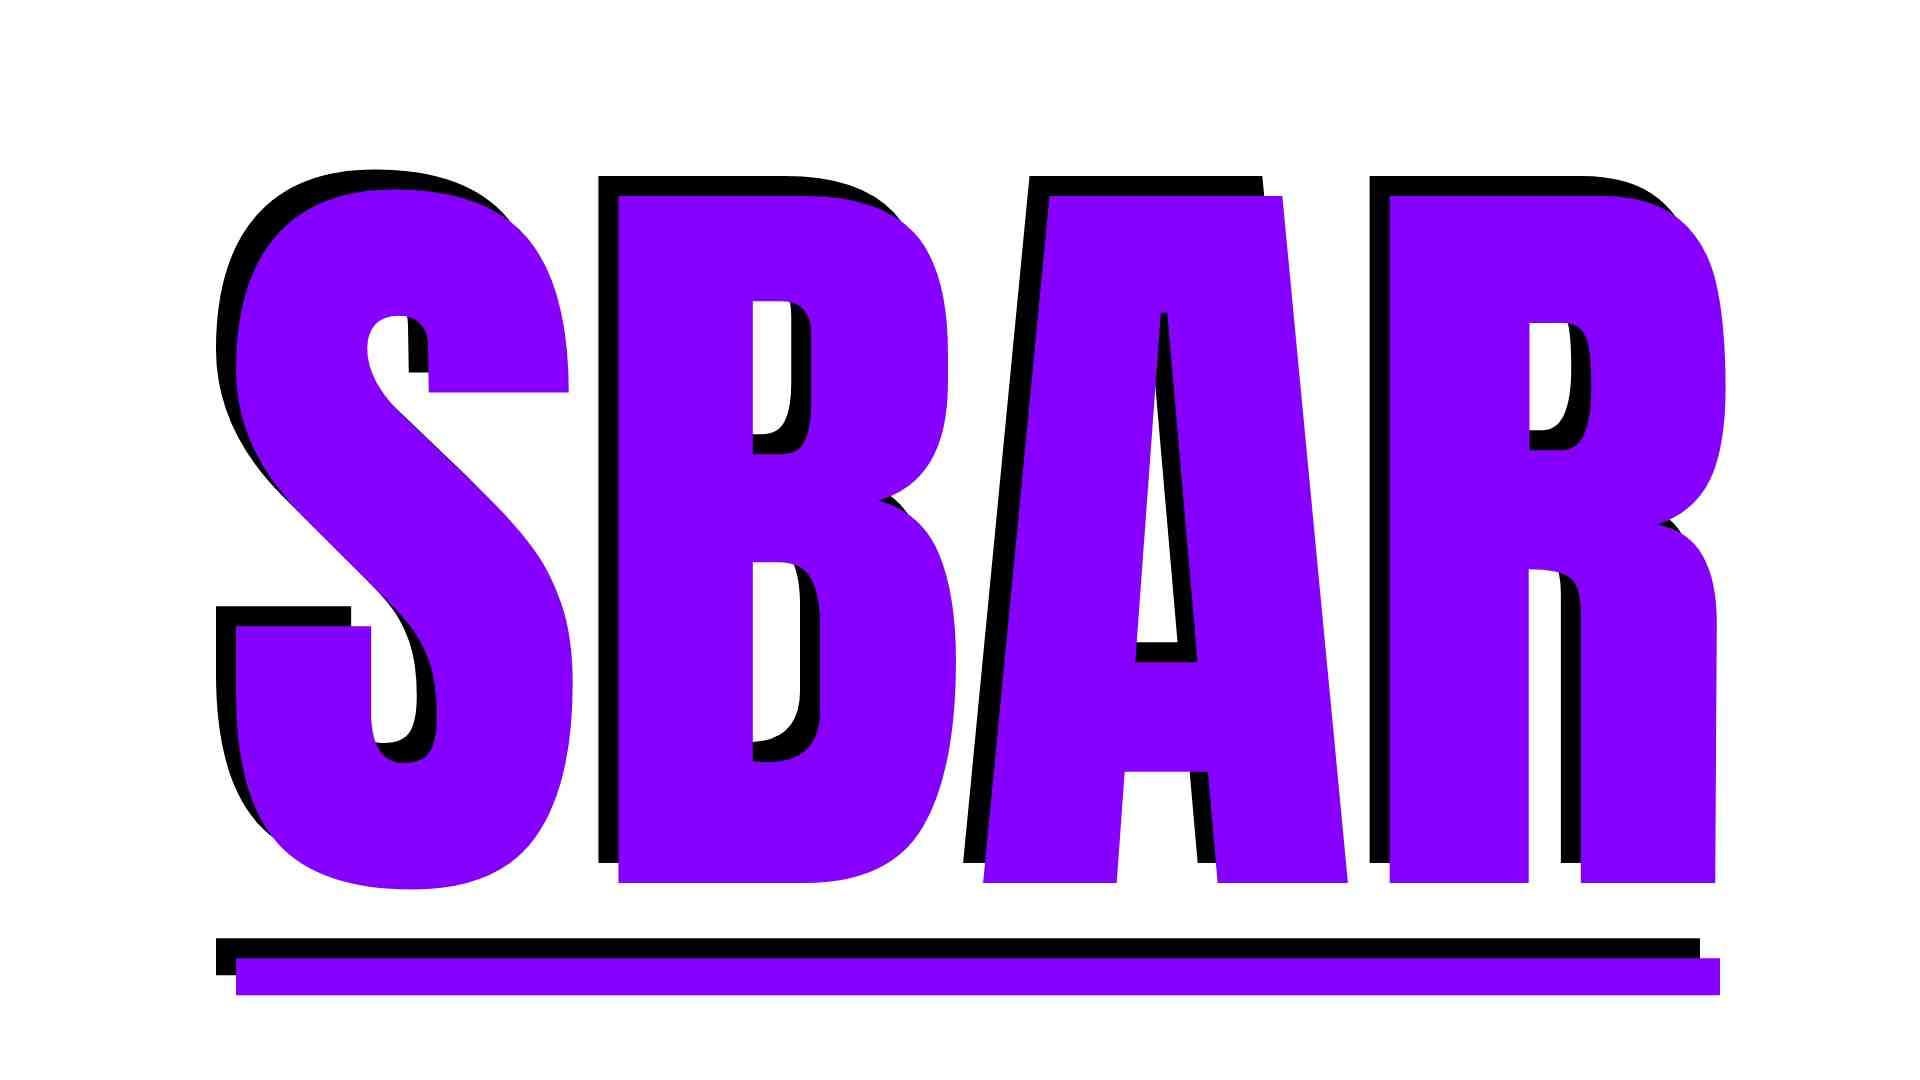 SBAR explained in detail